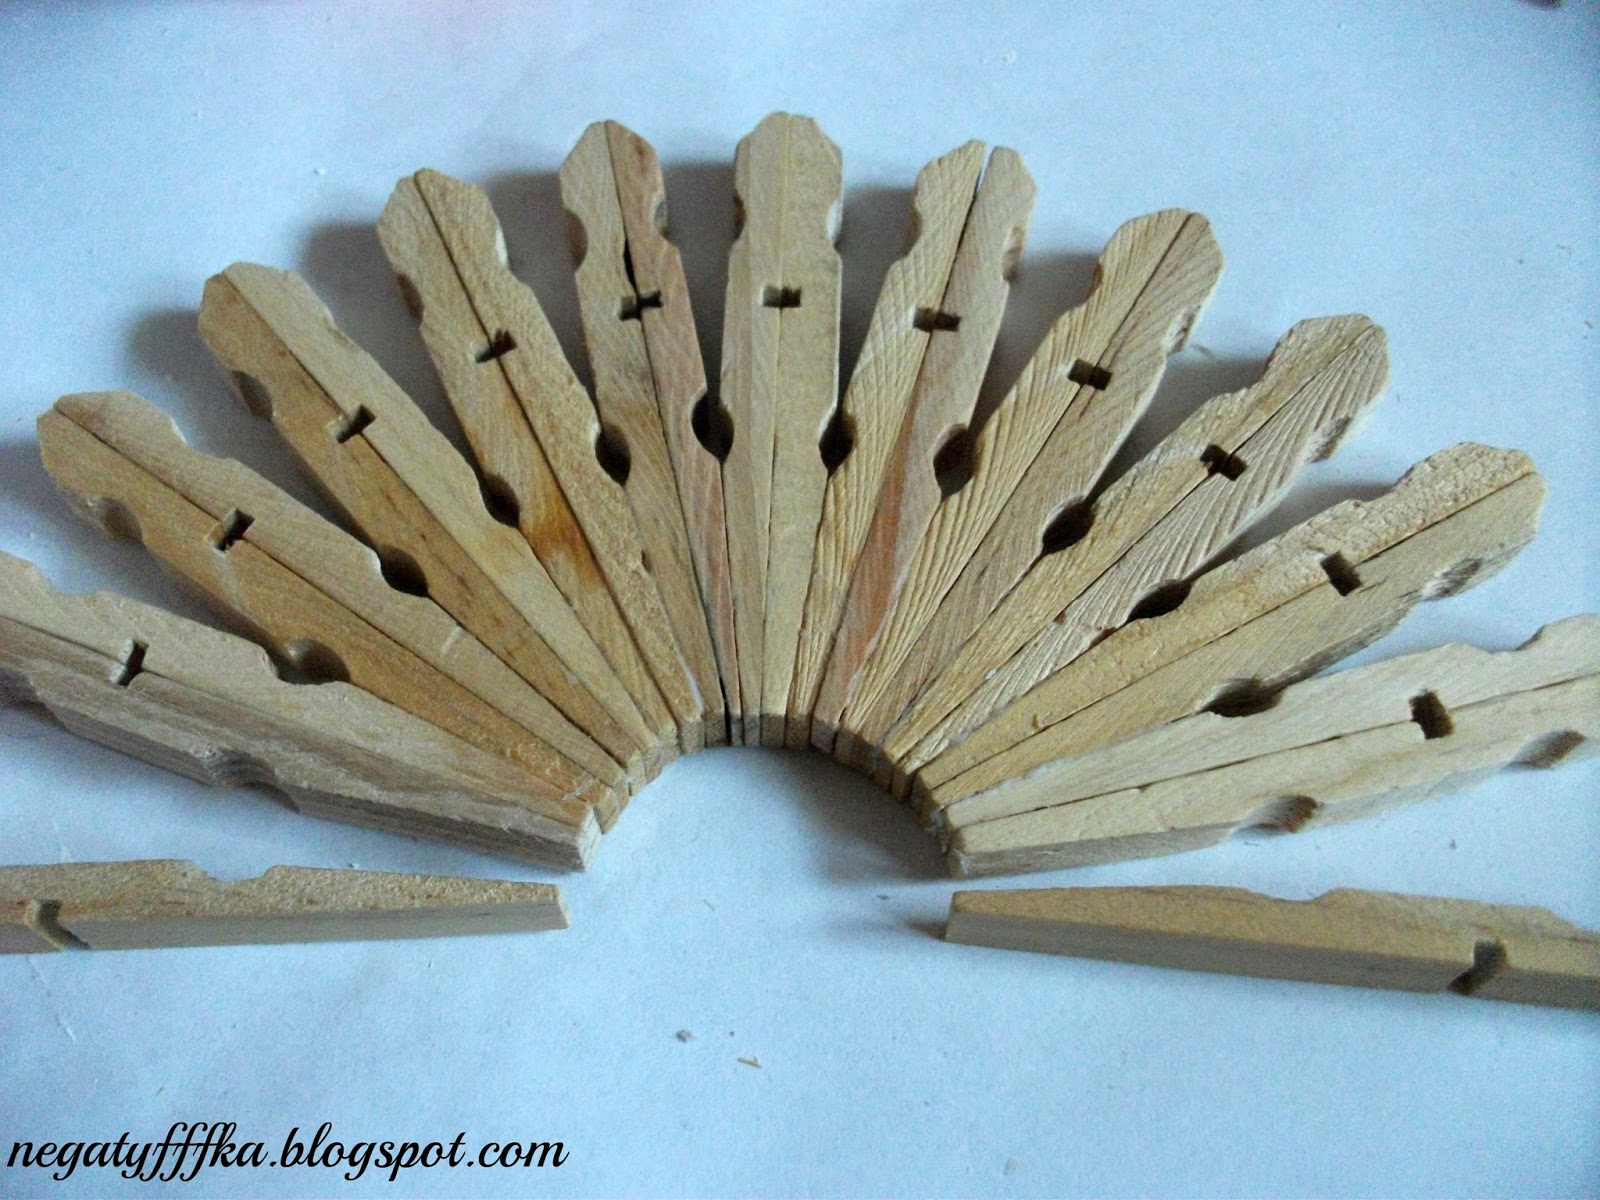 How-to-Make-a-Unique-Napkin-Holder-from-Clothespins-5.jpg